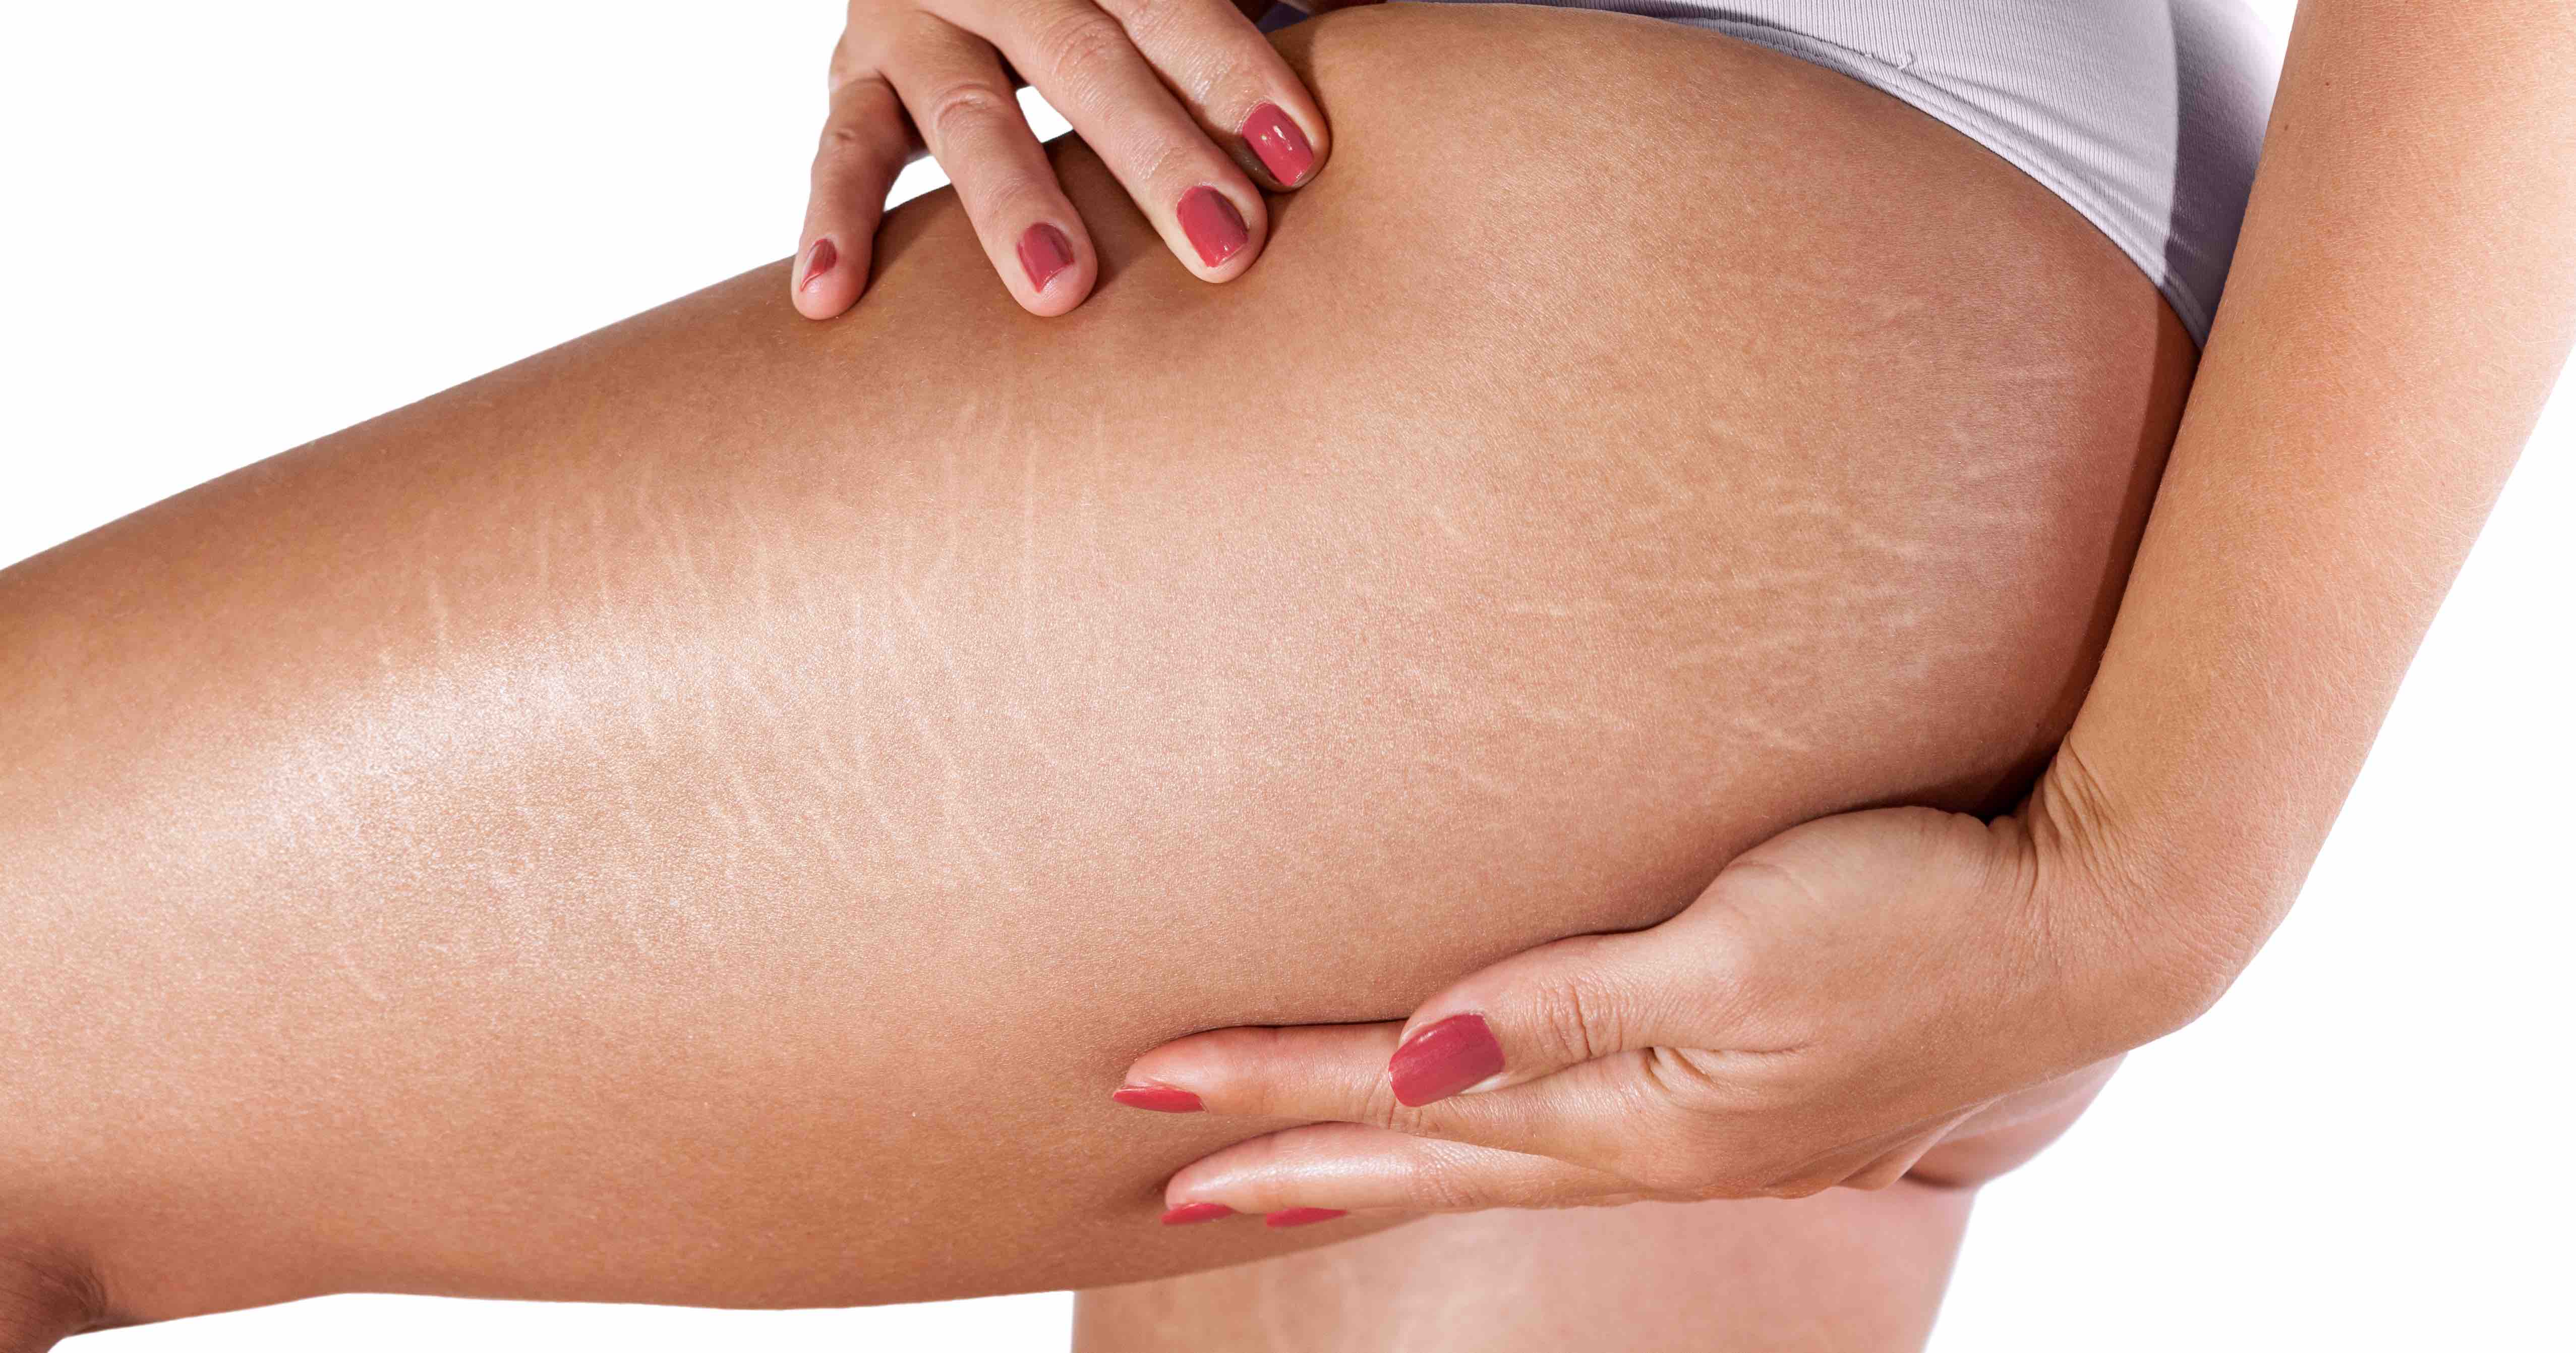 Mature woman big ass stretch marks It Took A Health Crisis For Me To Embrace My Stretch Marks